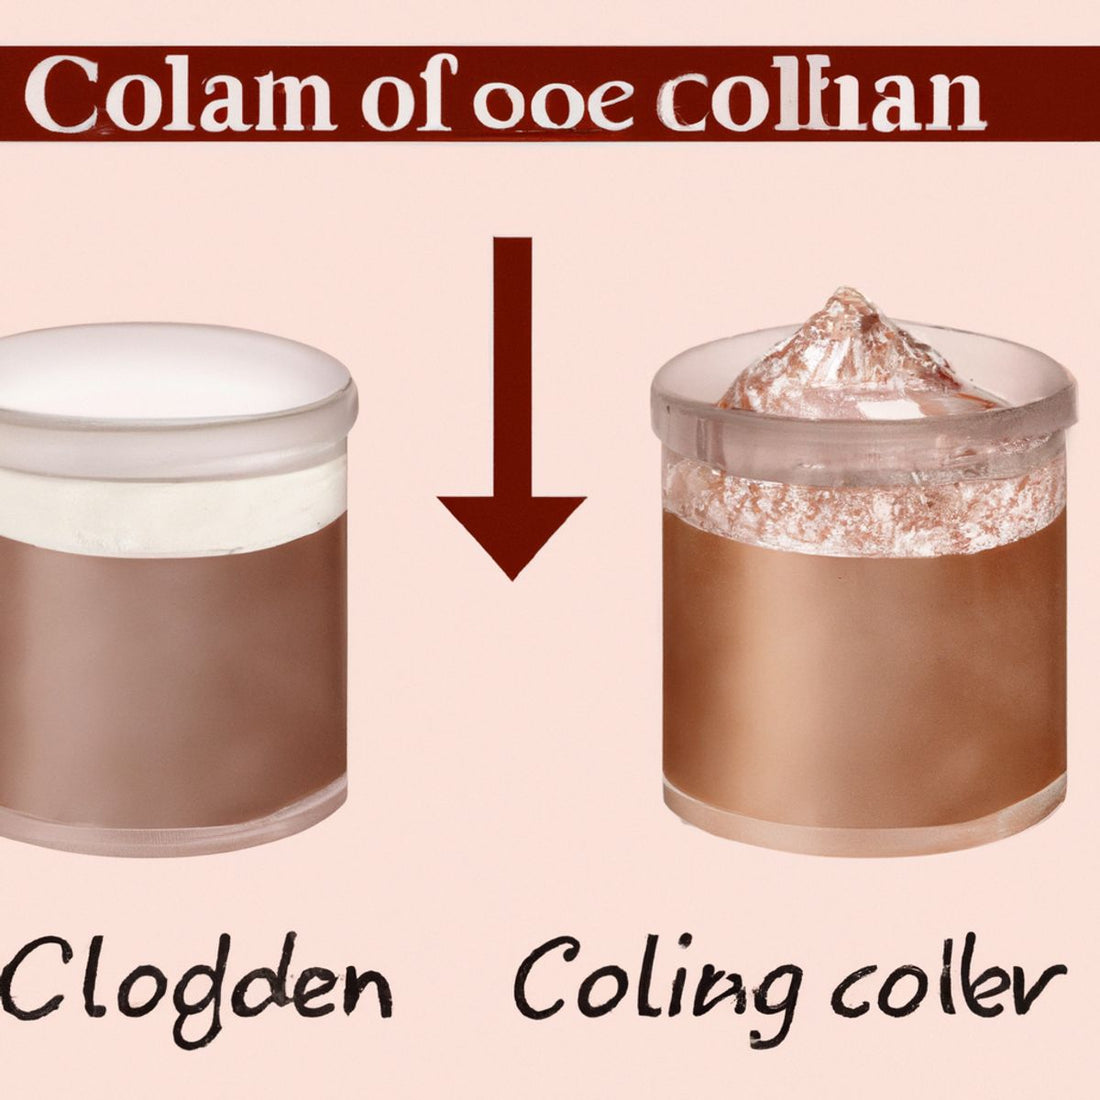 Turn Back Time: How Collagen Powder Helps Combat Aging